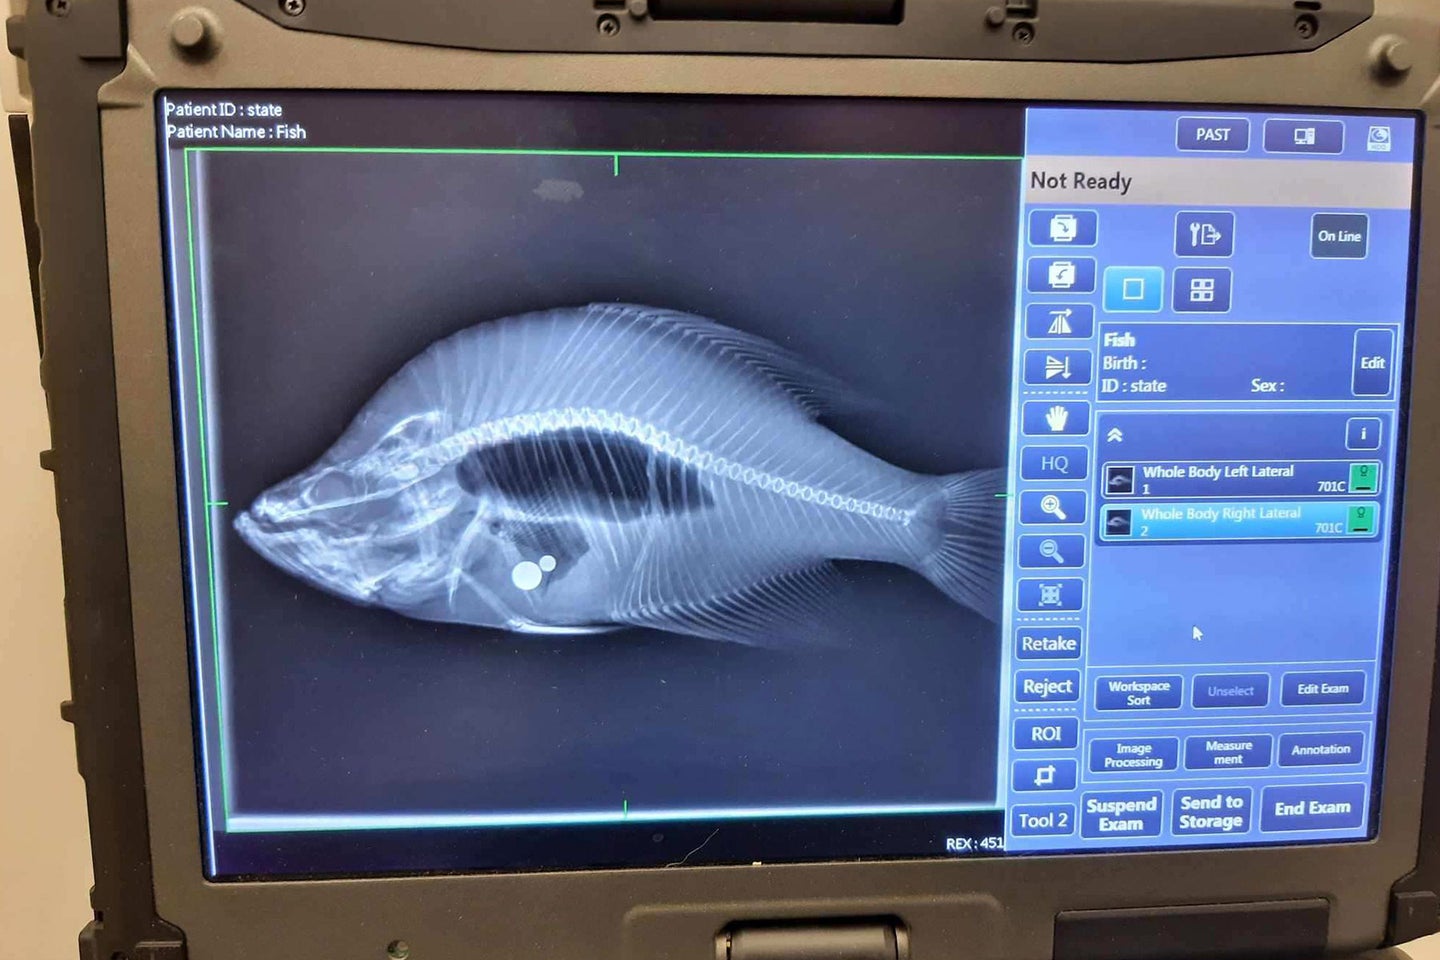 An x-ray of a crappie stuffed with steel ball bearings.